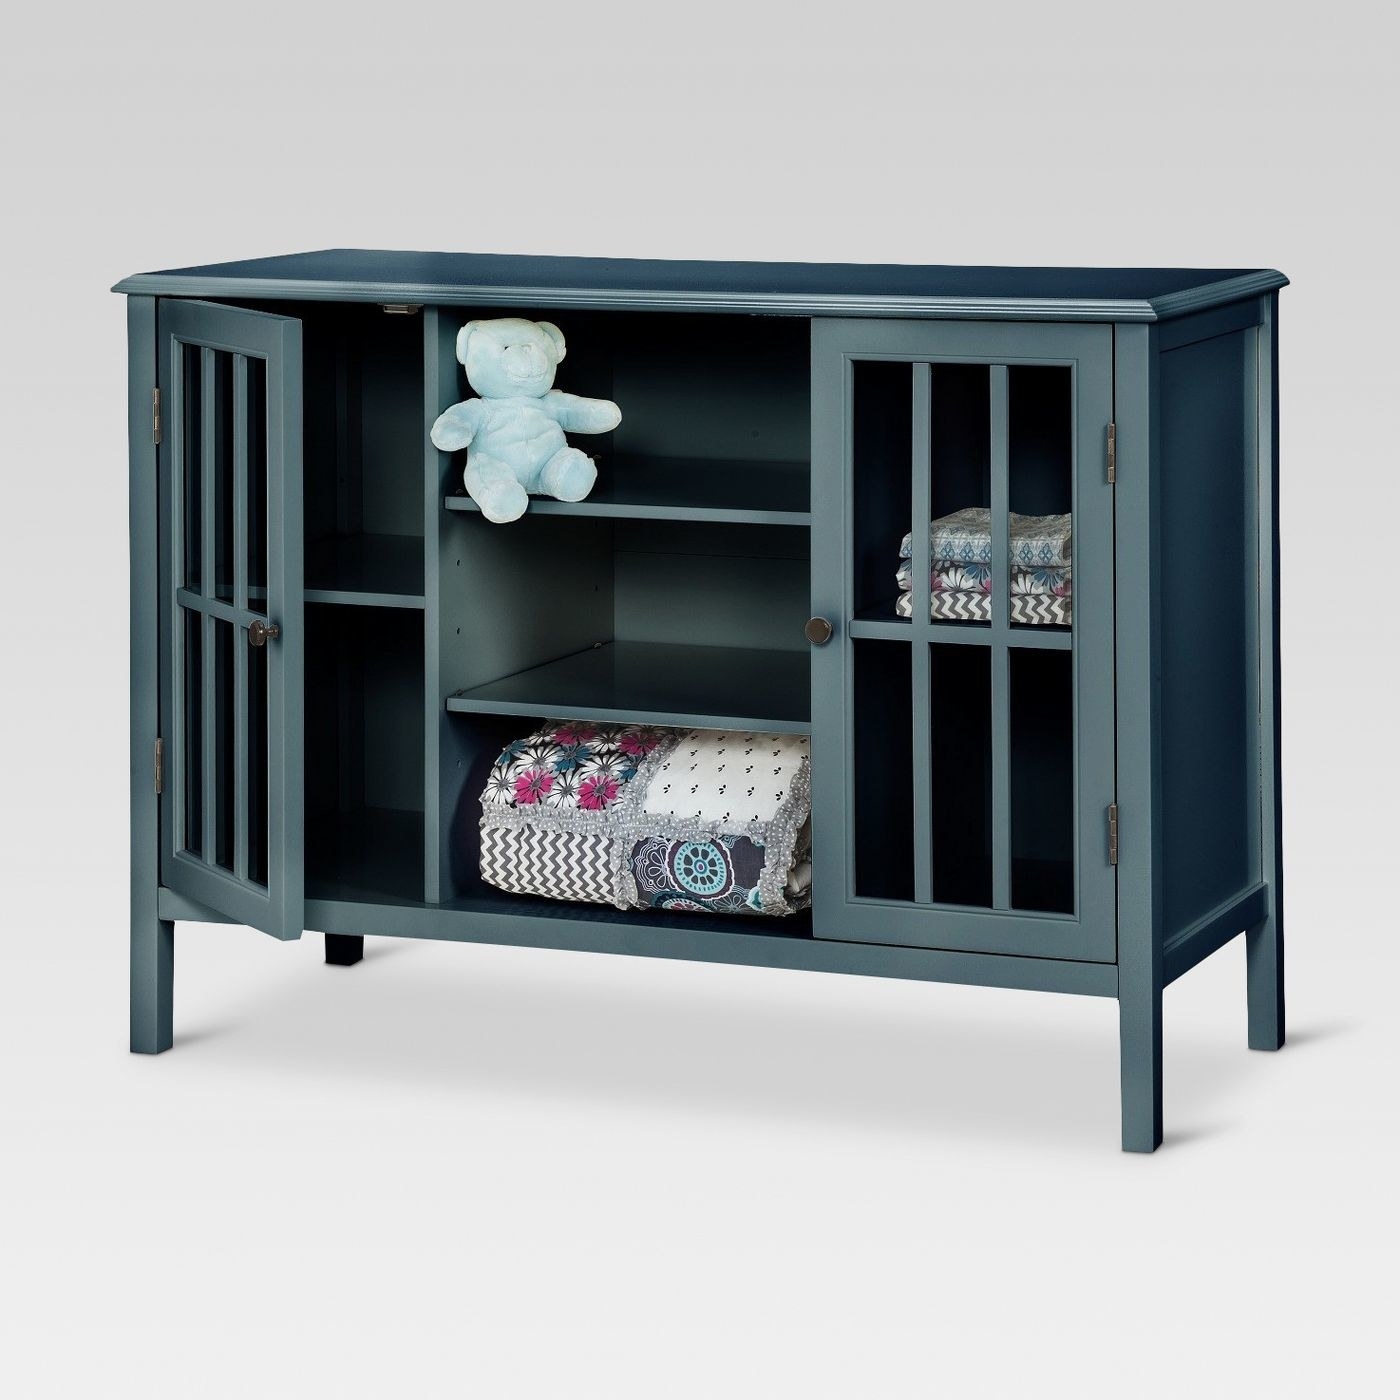 Dark blue cabinet with three shelves and two compartments